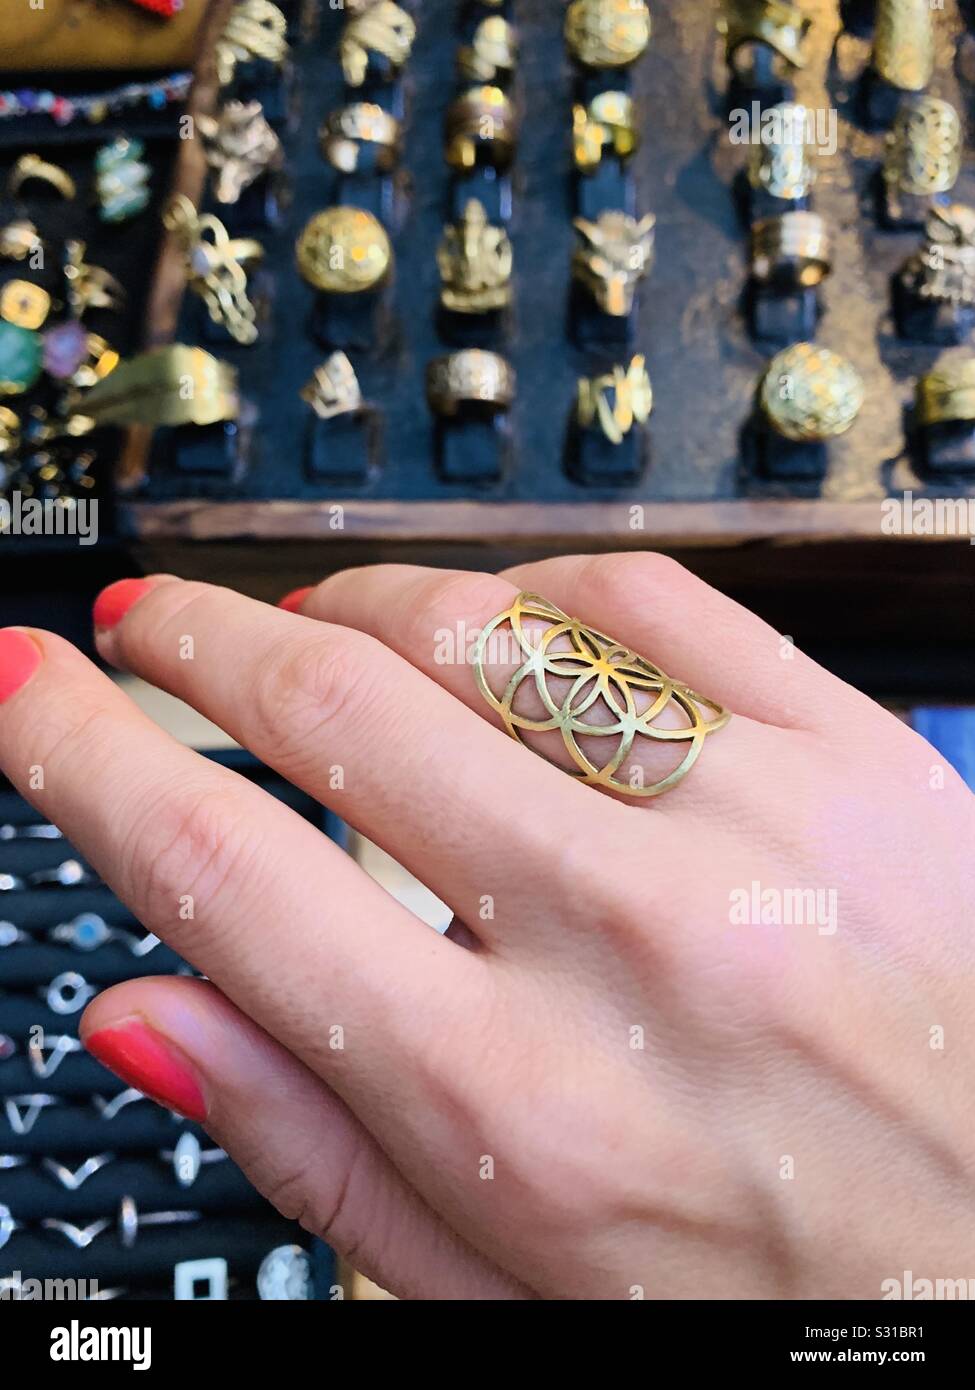 Trying on a seed of life ring at a jewellery stall with ring display in the background Stock Photo